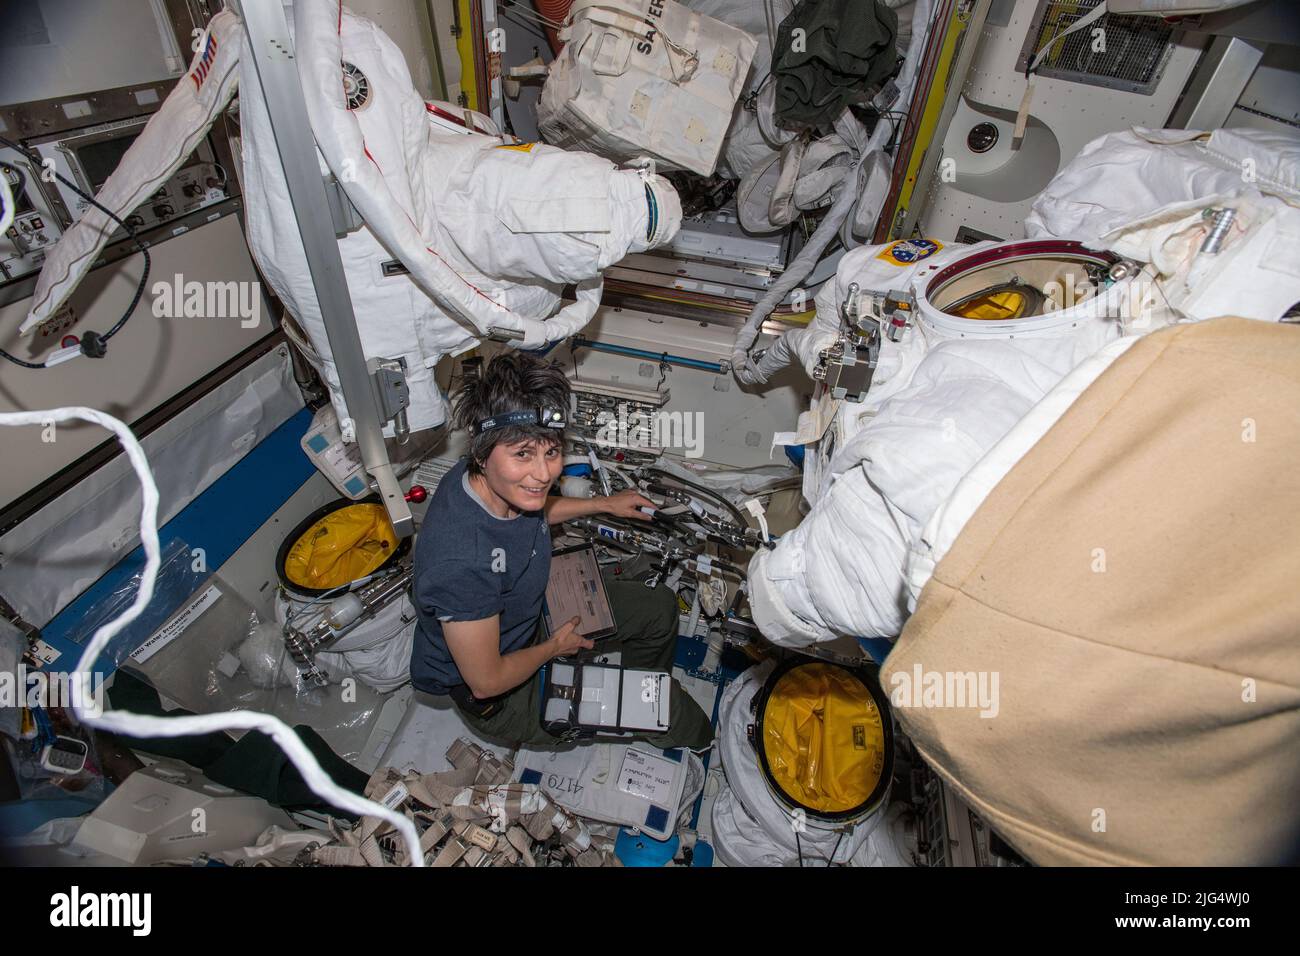 International Space Station Expedition 67 Flight Engineer Samantha Cristoforetti of the ESA, performs maintenance on the EMU spacesuits inside the Quest airlock aboard the orbiting spacelab, May 11, 2022 in Earth Orbit. Stock Photo